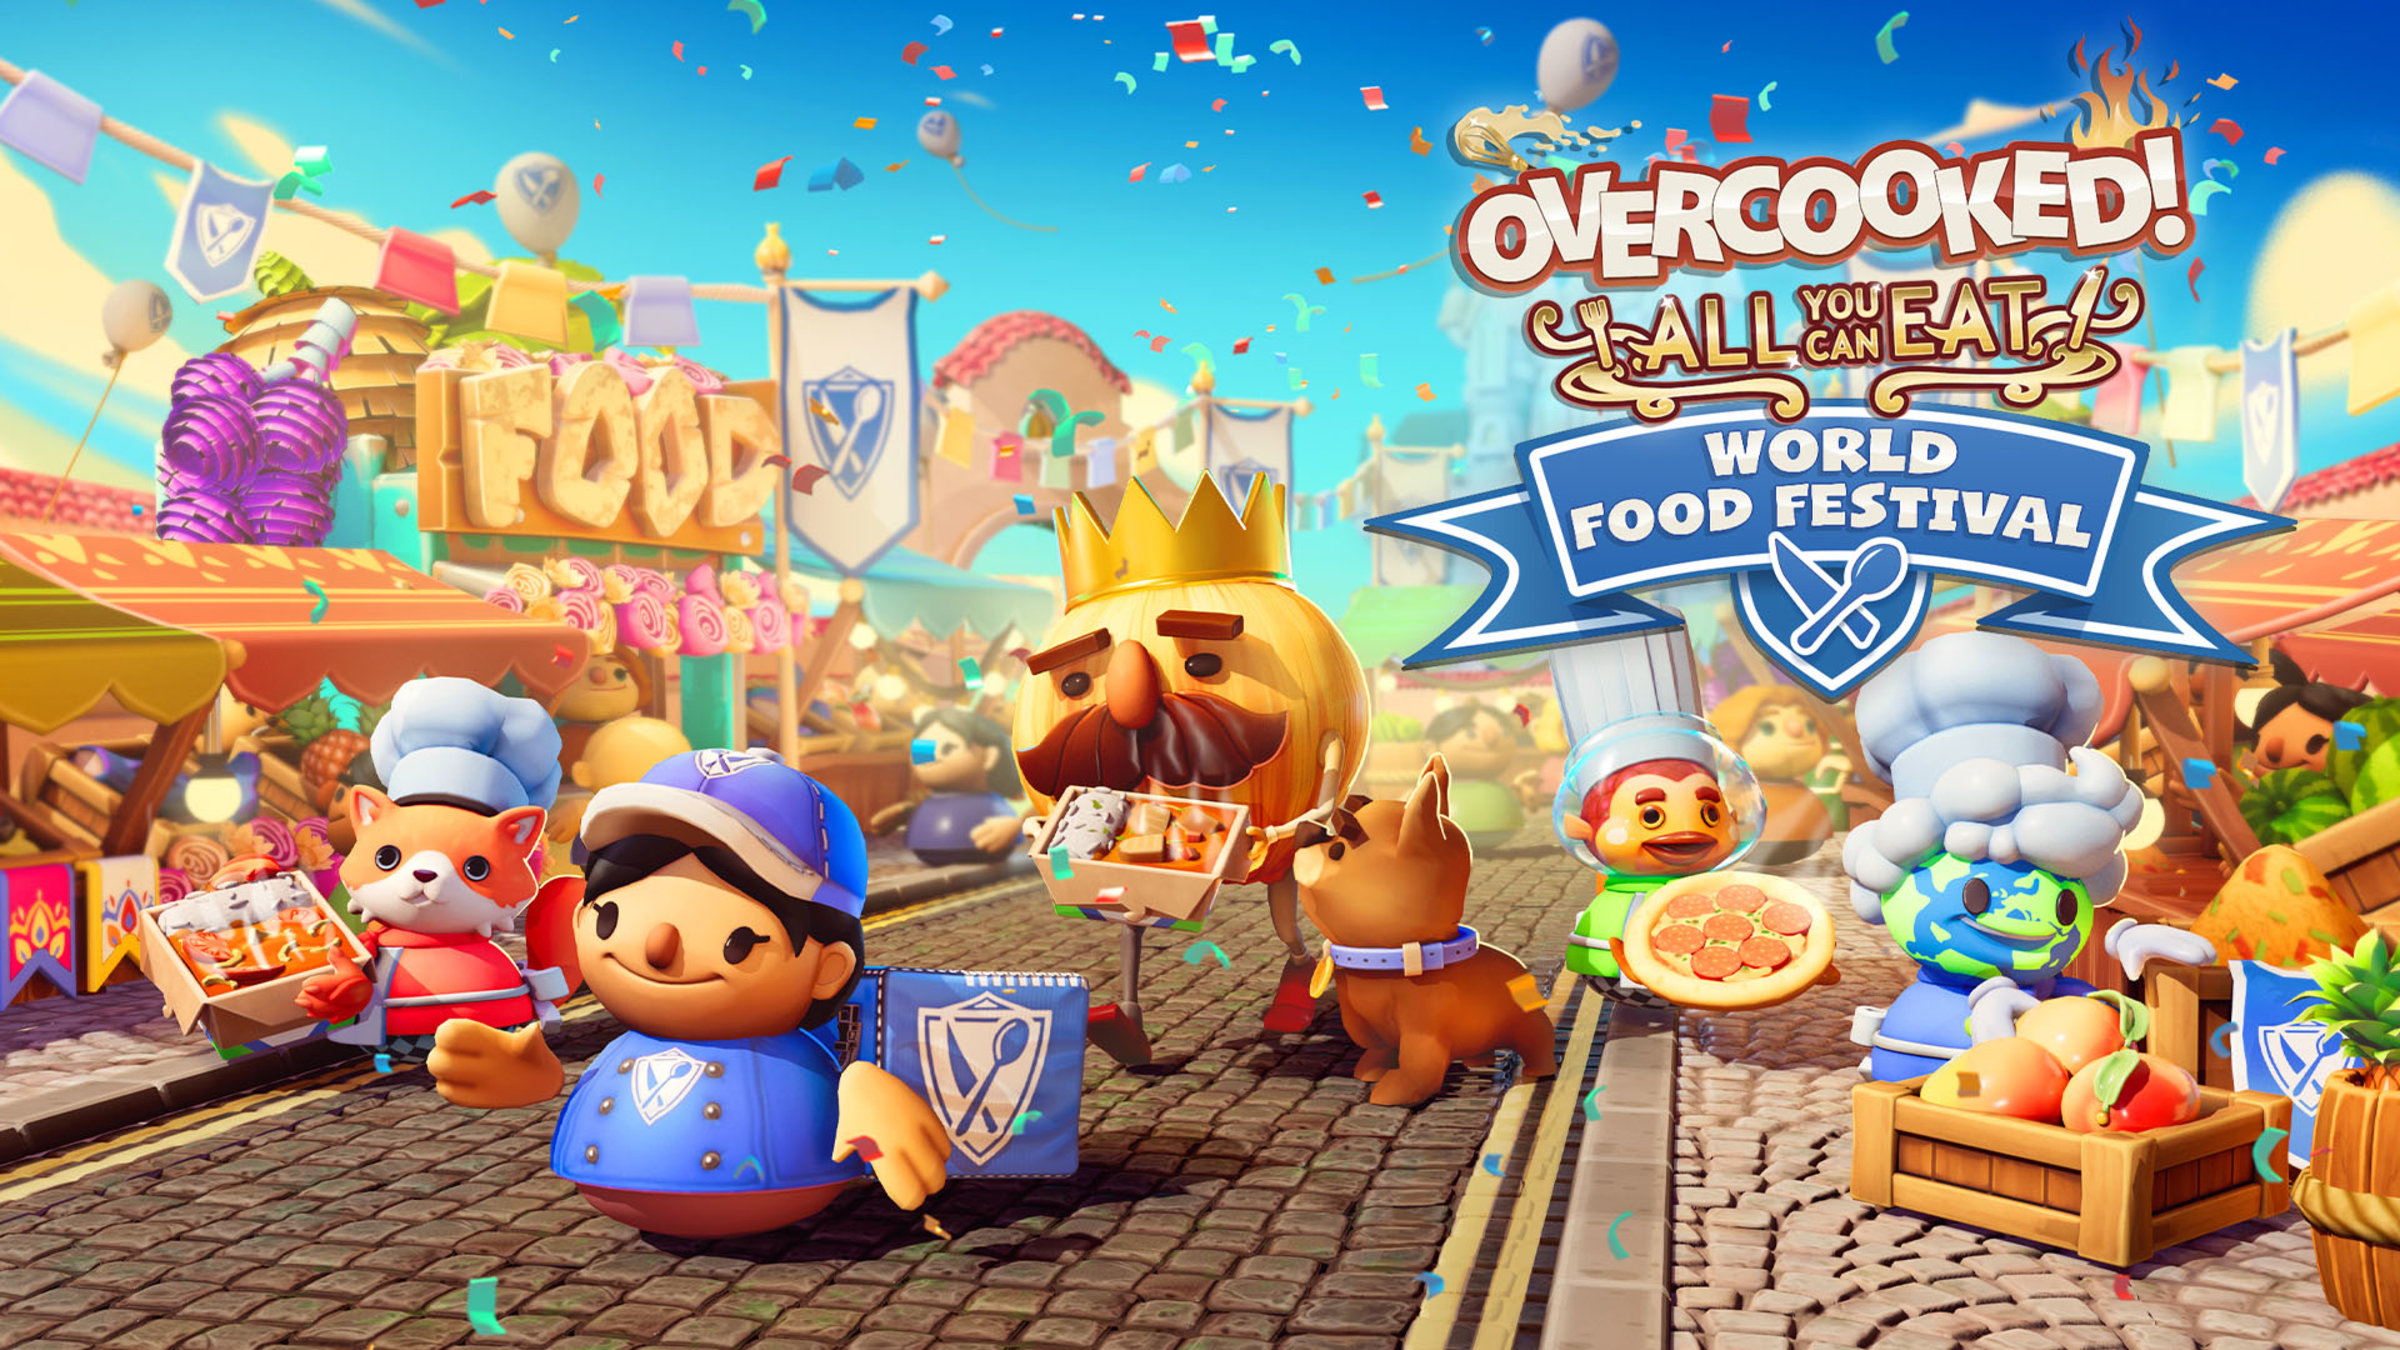 Overcooked is available for free on Epic Games this week - Times